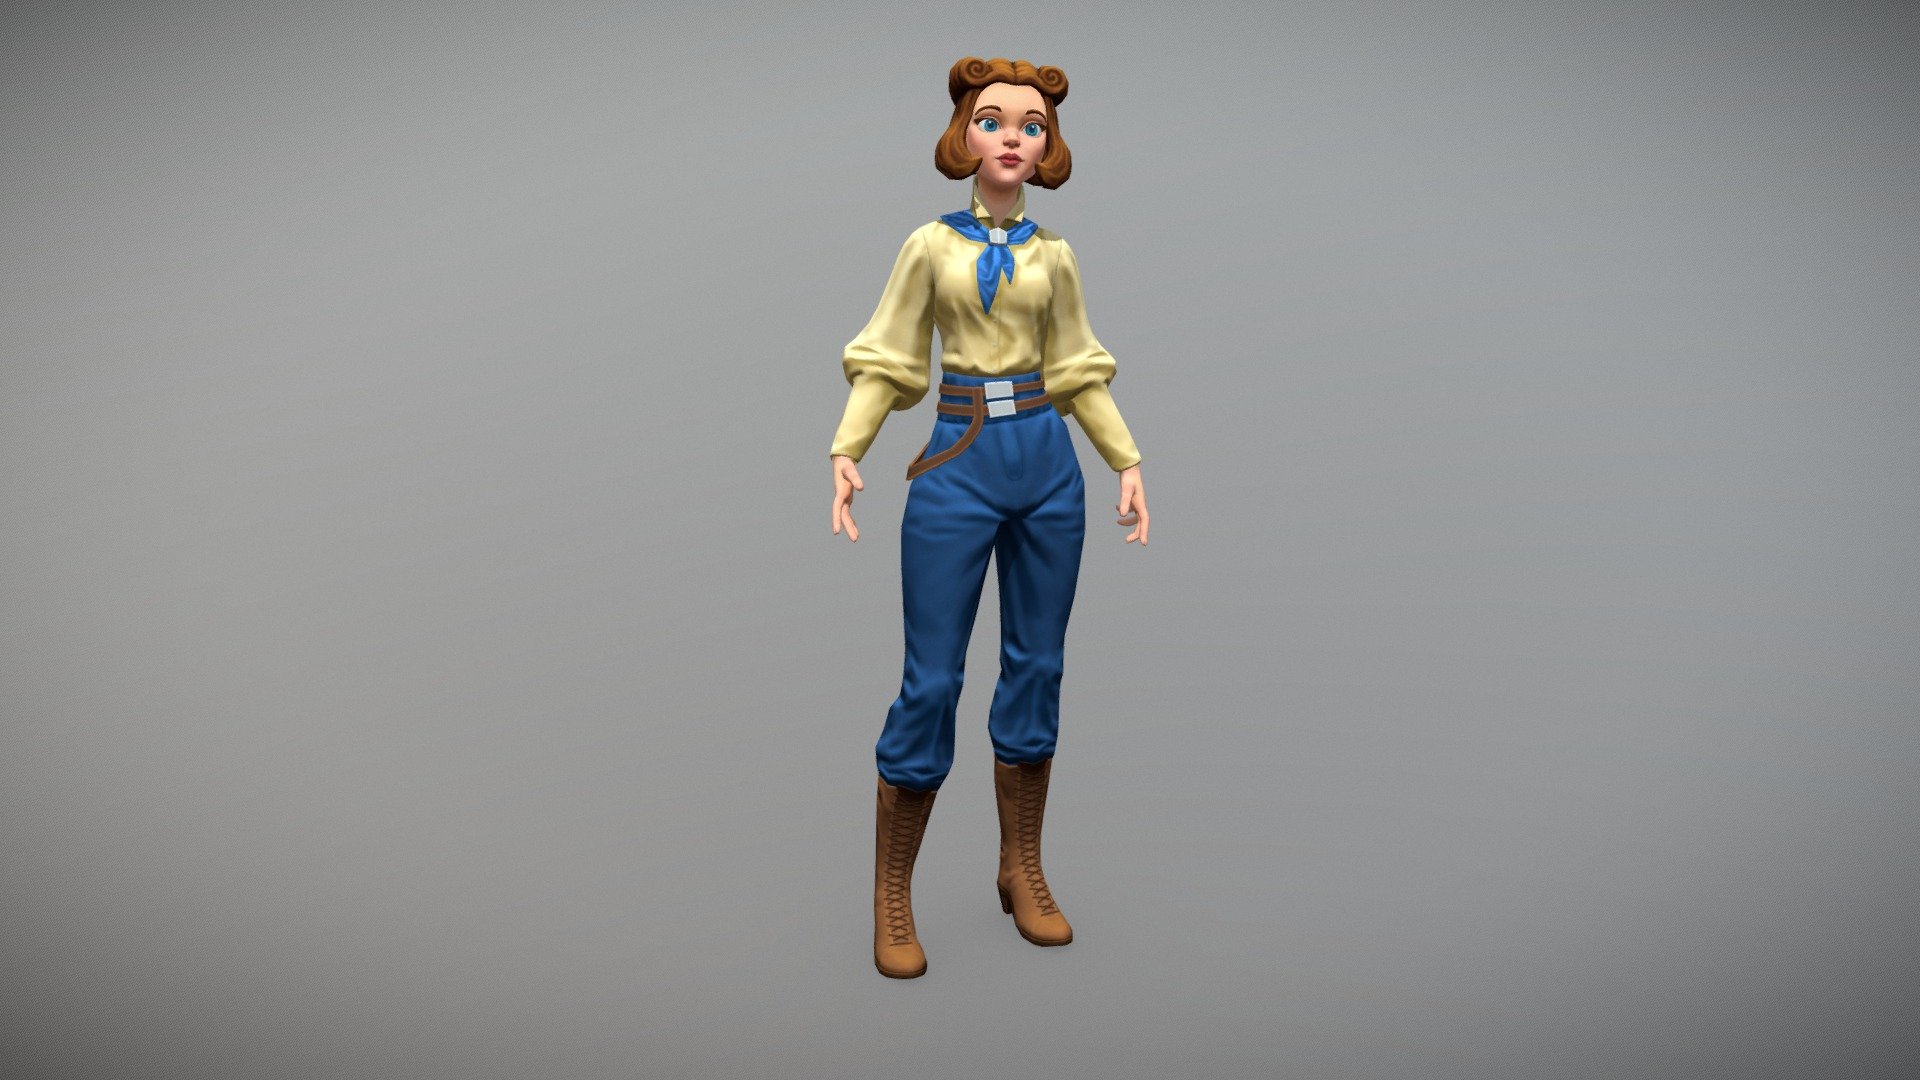 Low poly model of girl - The Girl - 3D model by UlitinMaxim 3d model